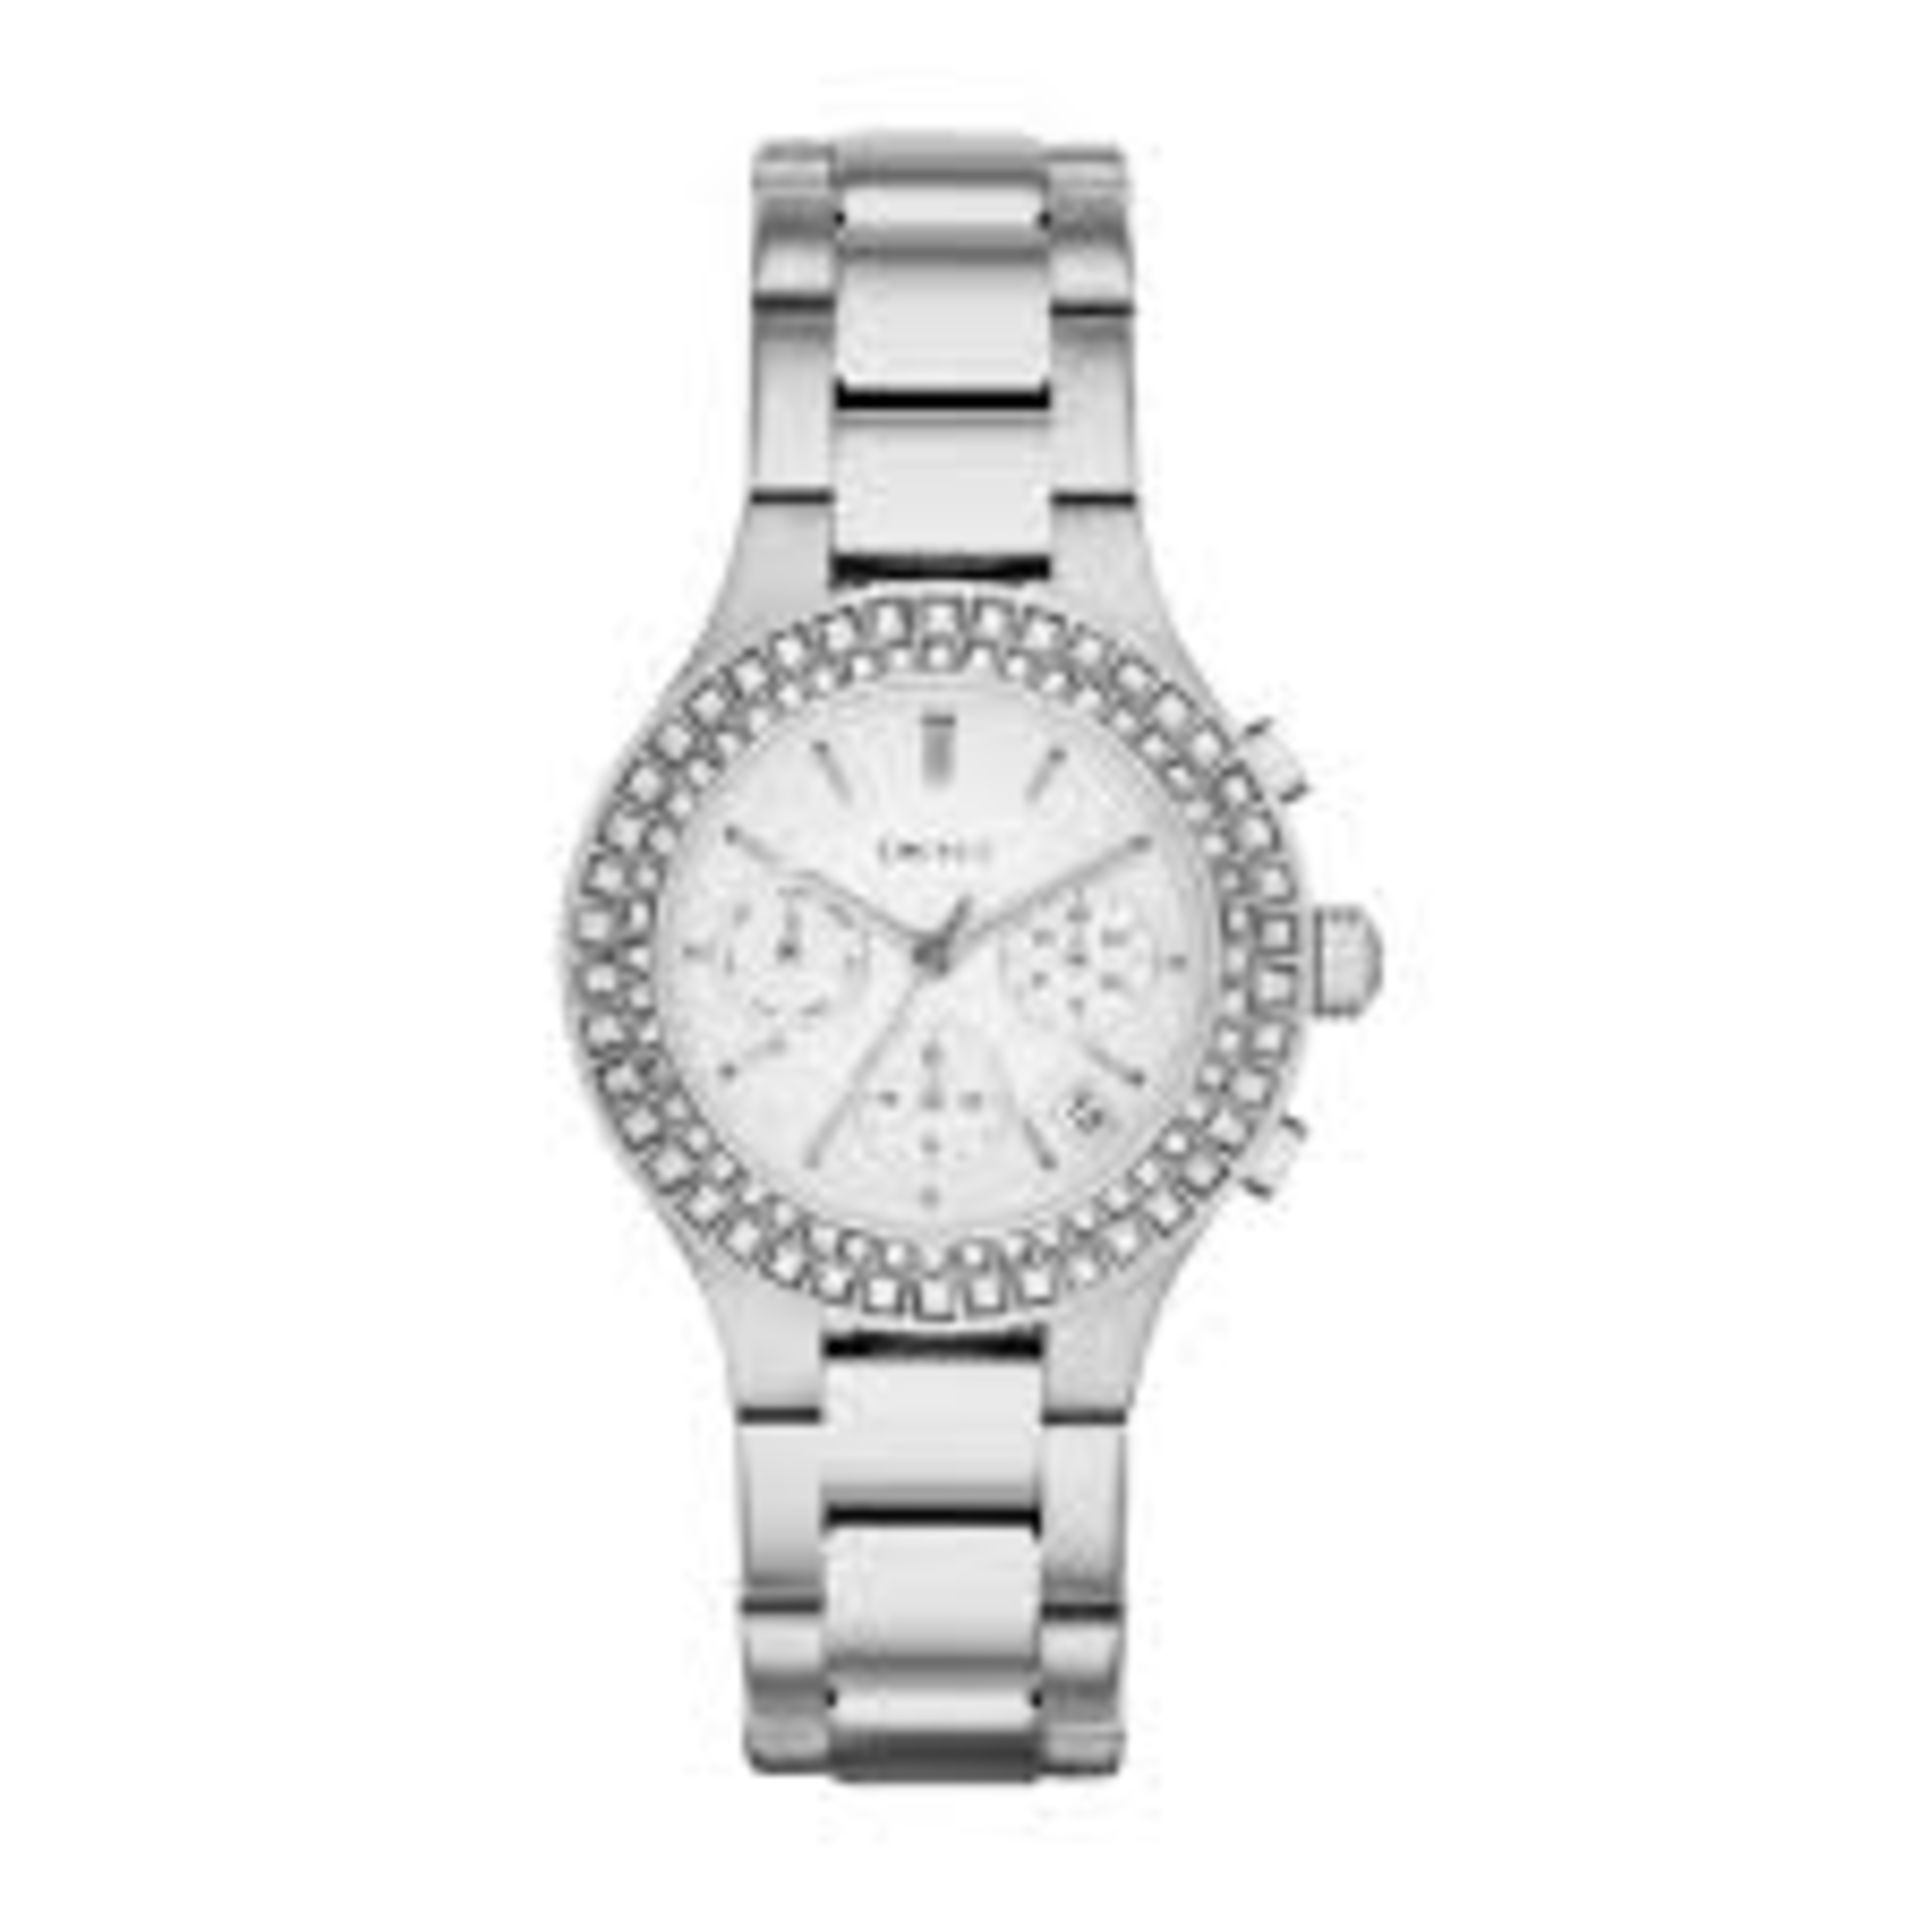 Ladies DKNY watch, model number NY2258. Stainless steel, round face with white dial and chronograph.